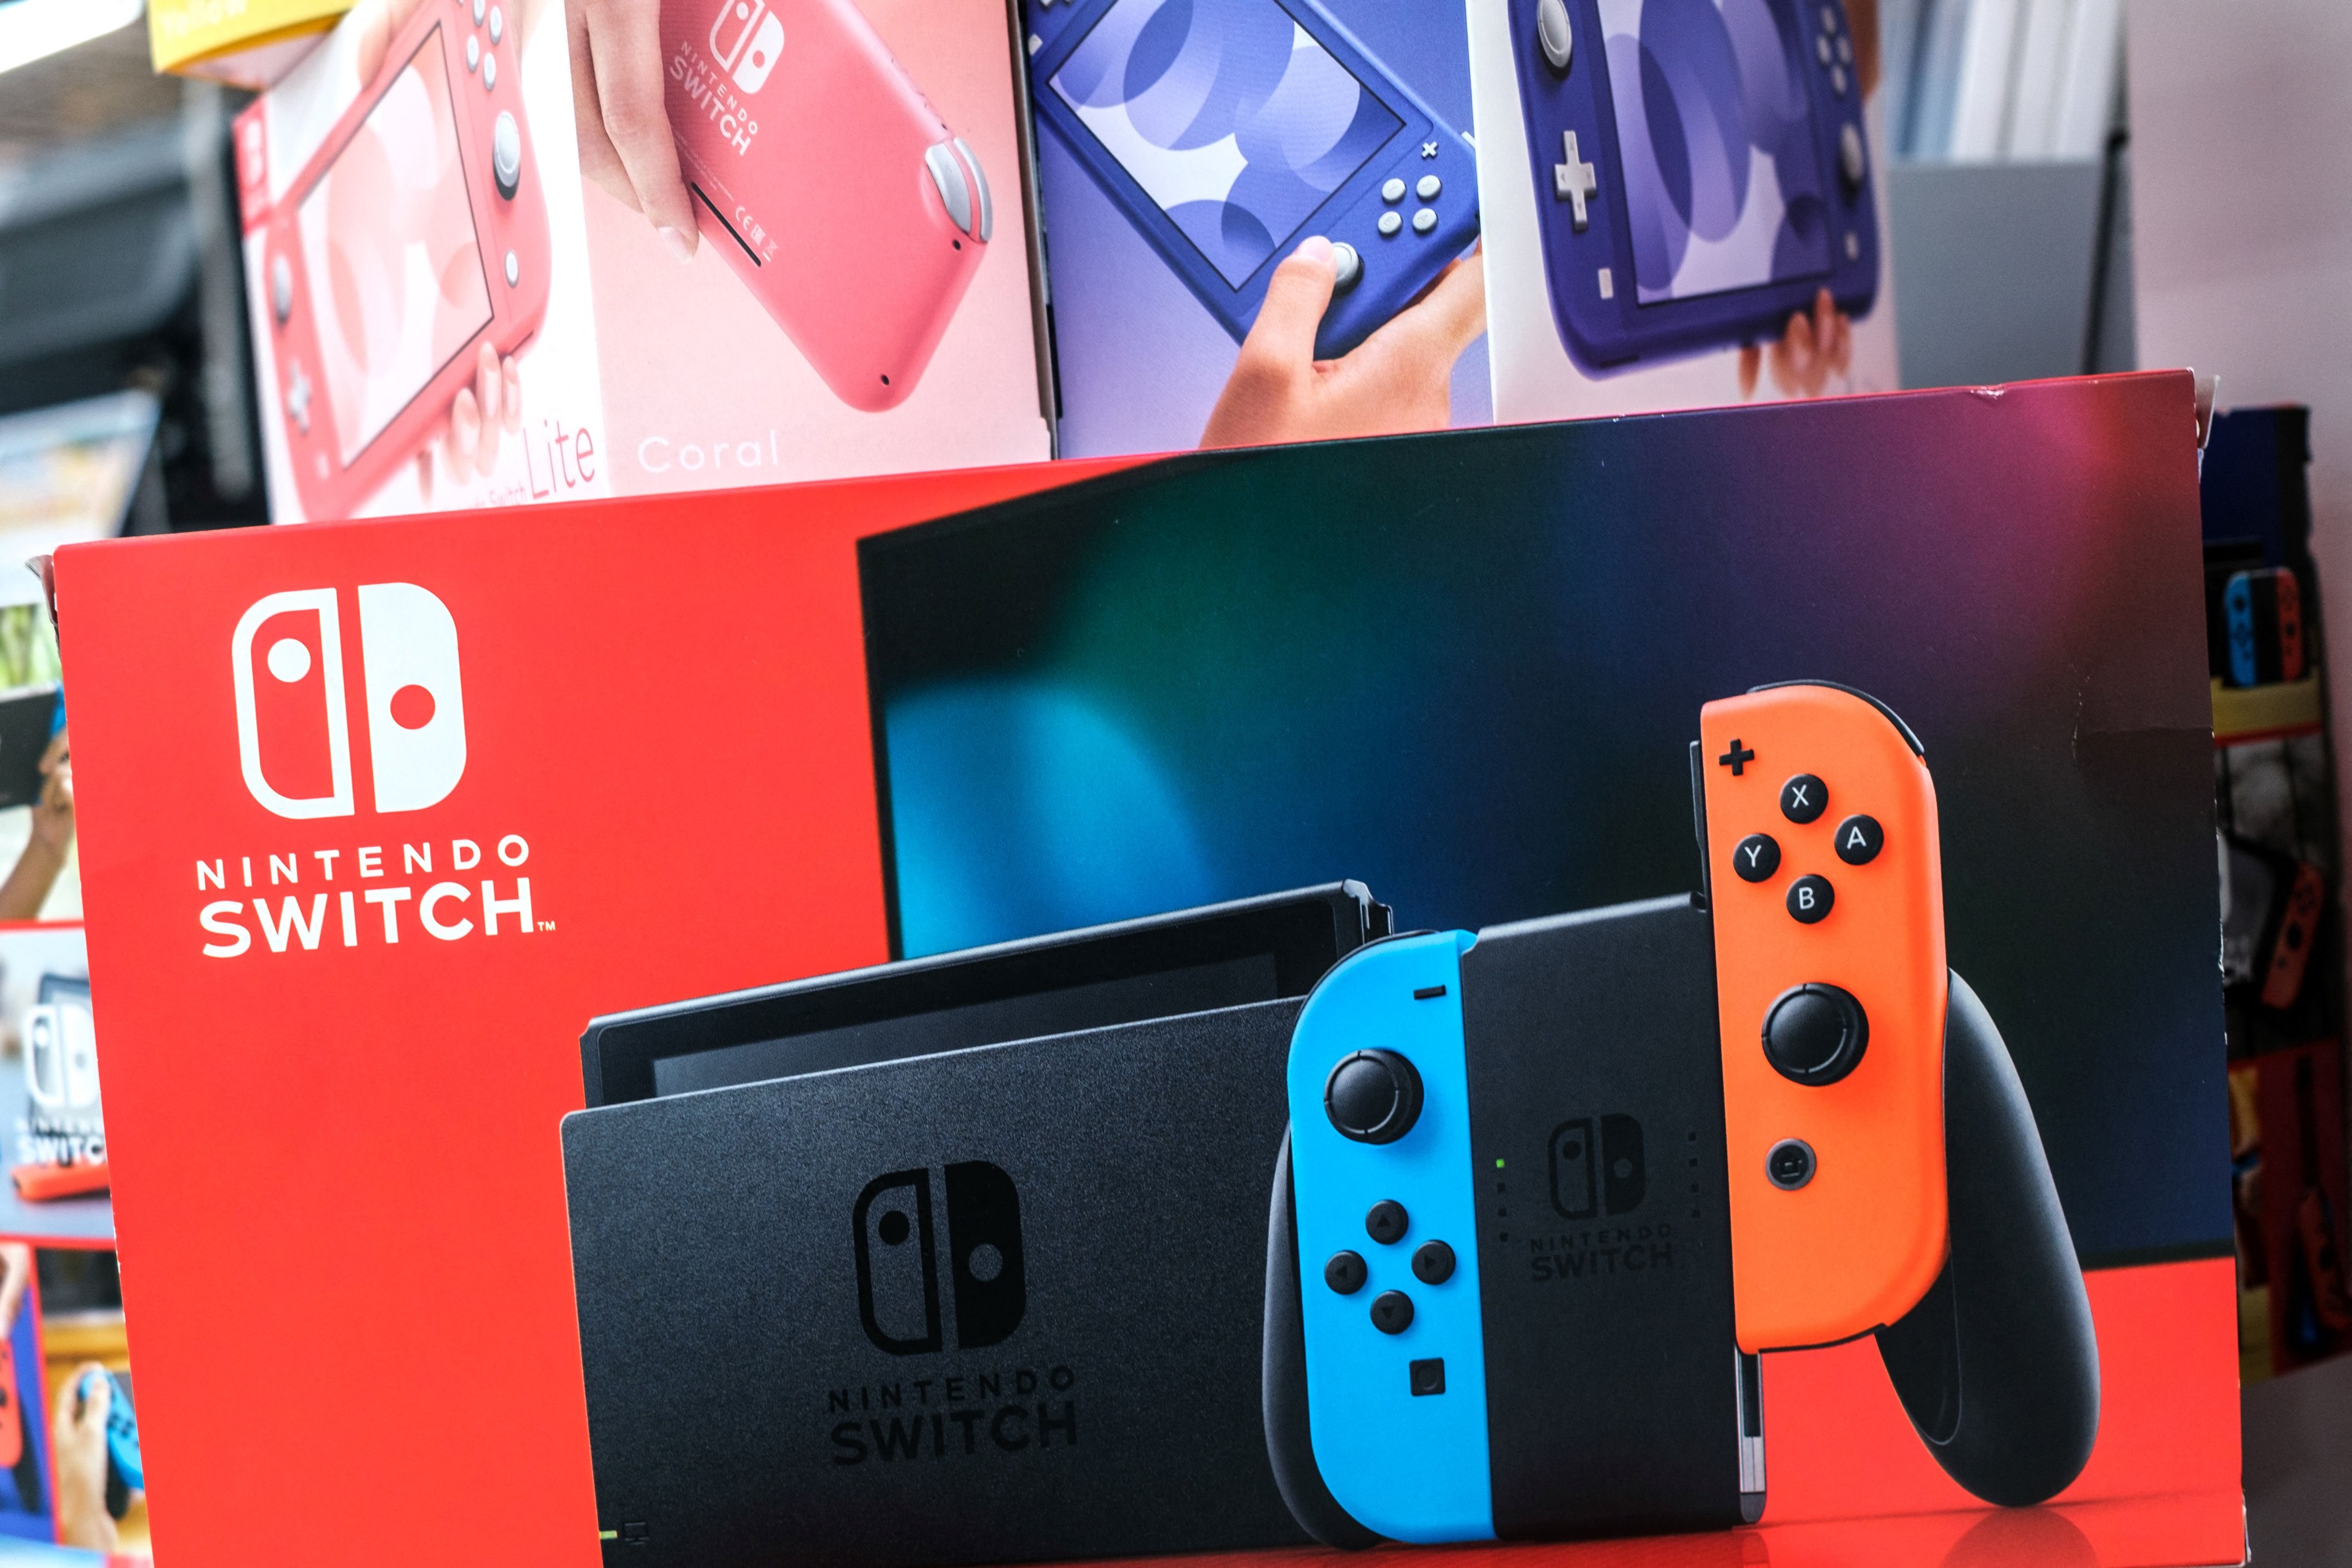 Nintendo Switch successor announcement is coming